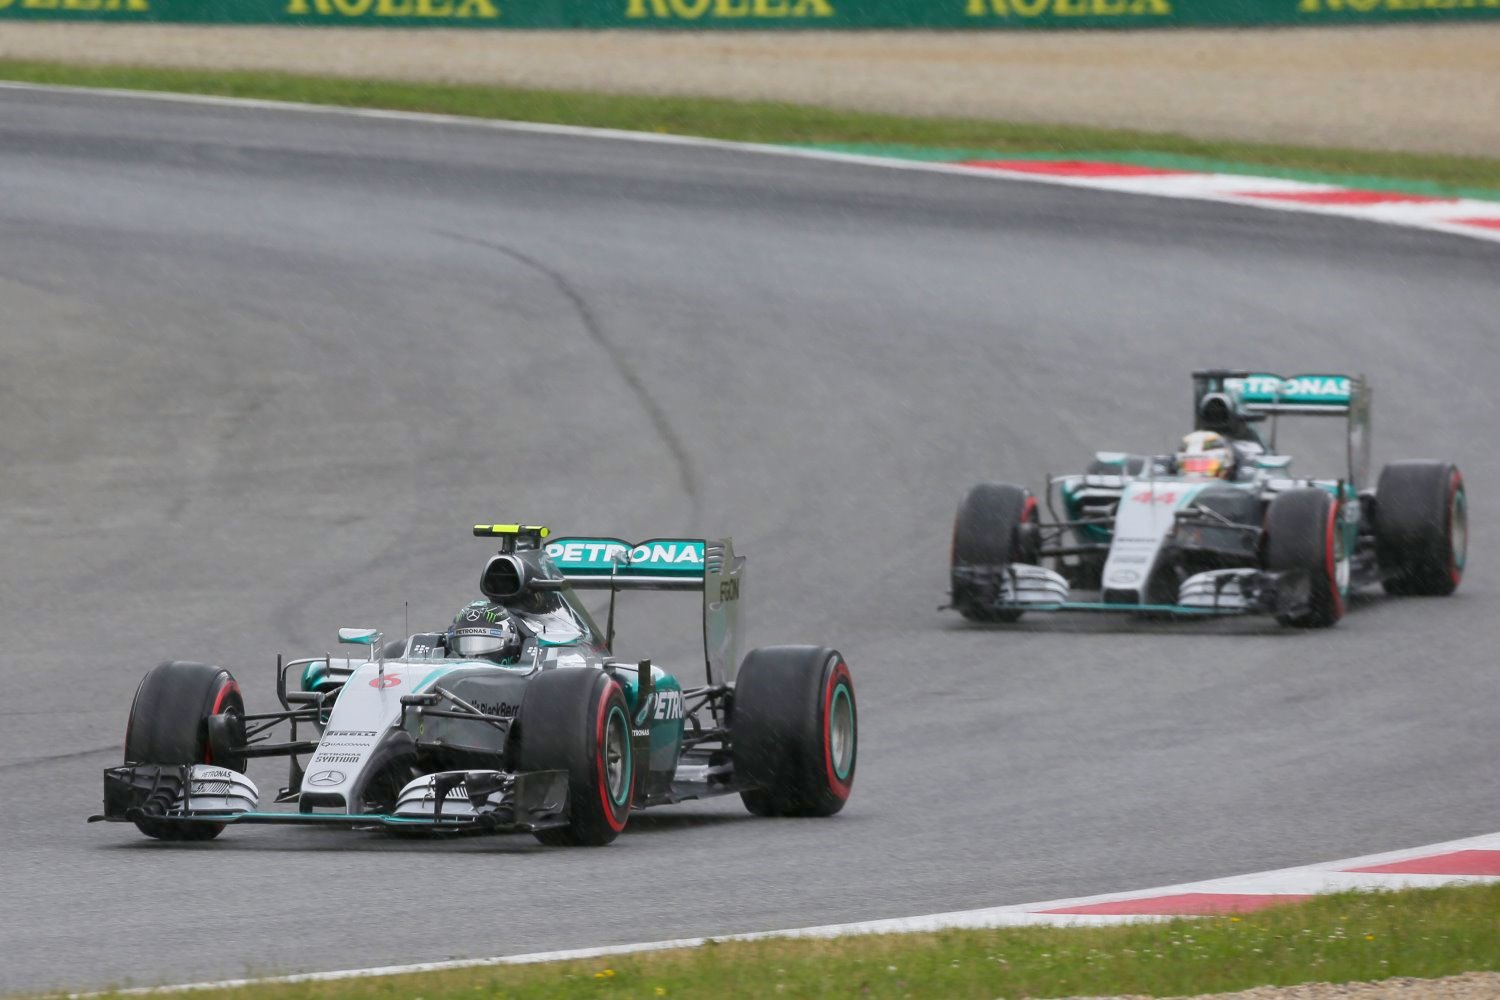 On track Hamilton and Rosberg were only passed three times this year - total